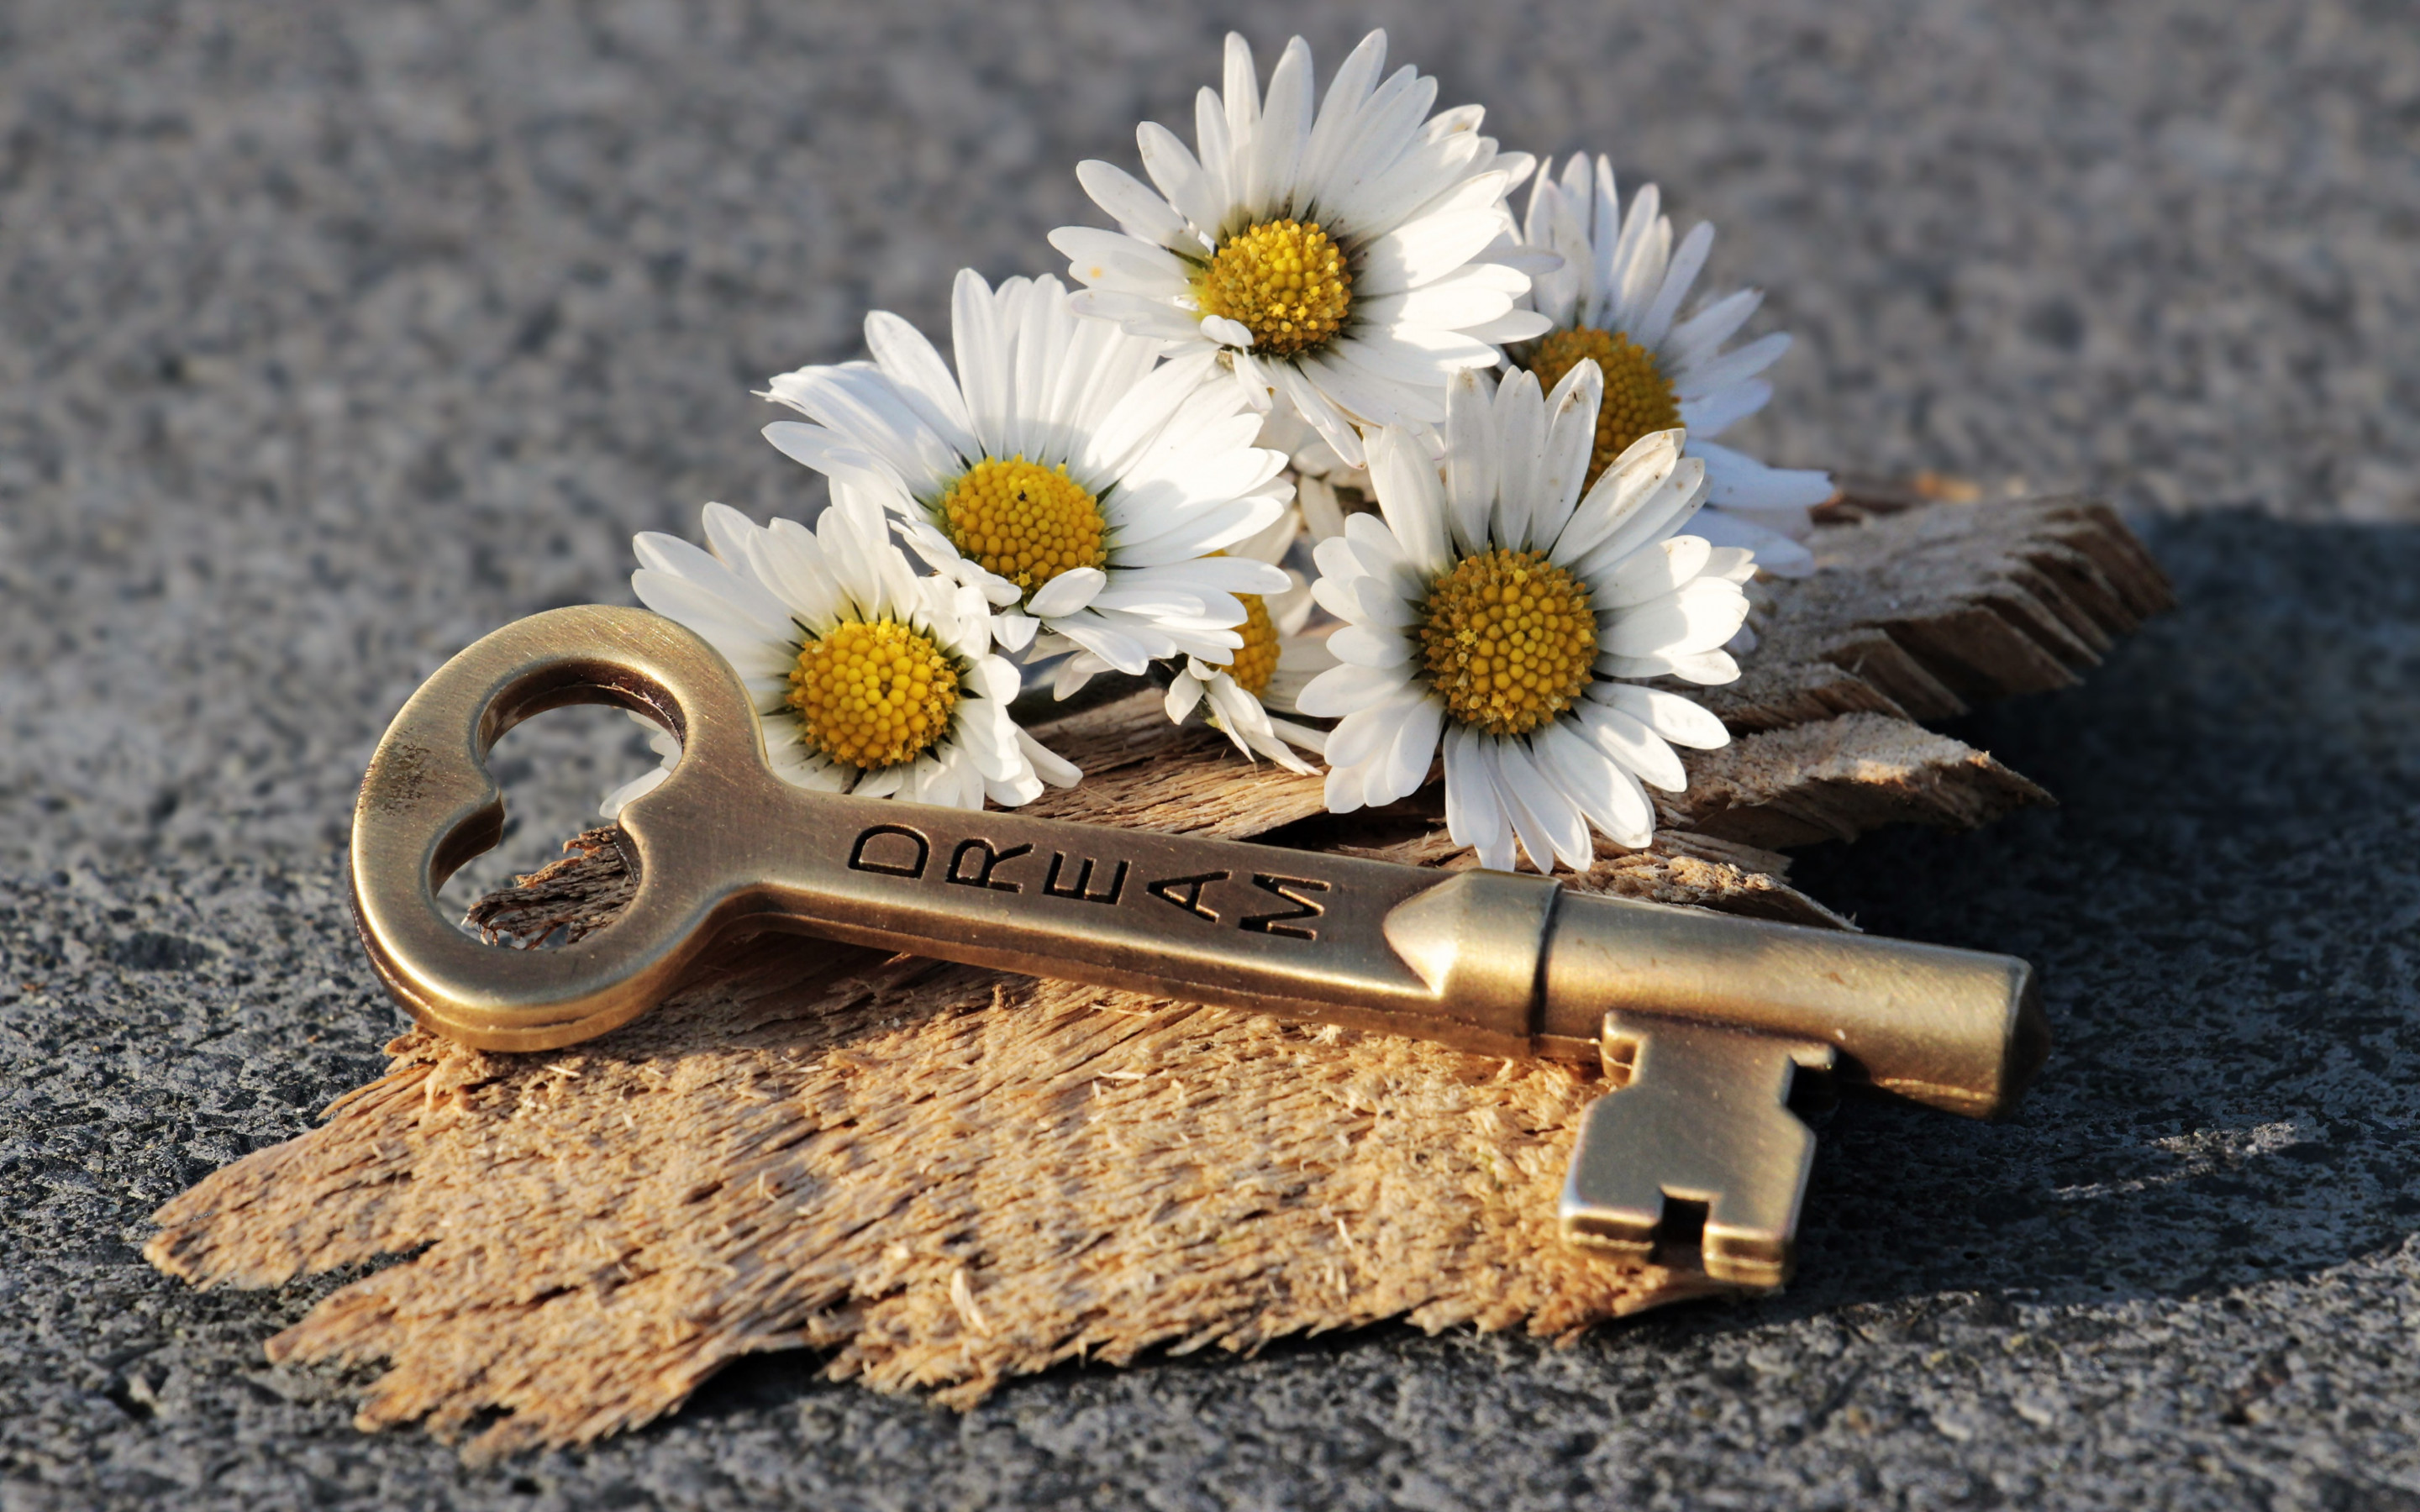 The dreams key and daisy flowers wallpaper 2880x1800